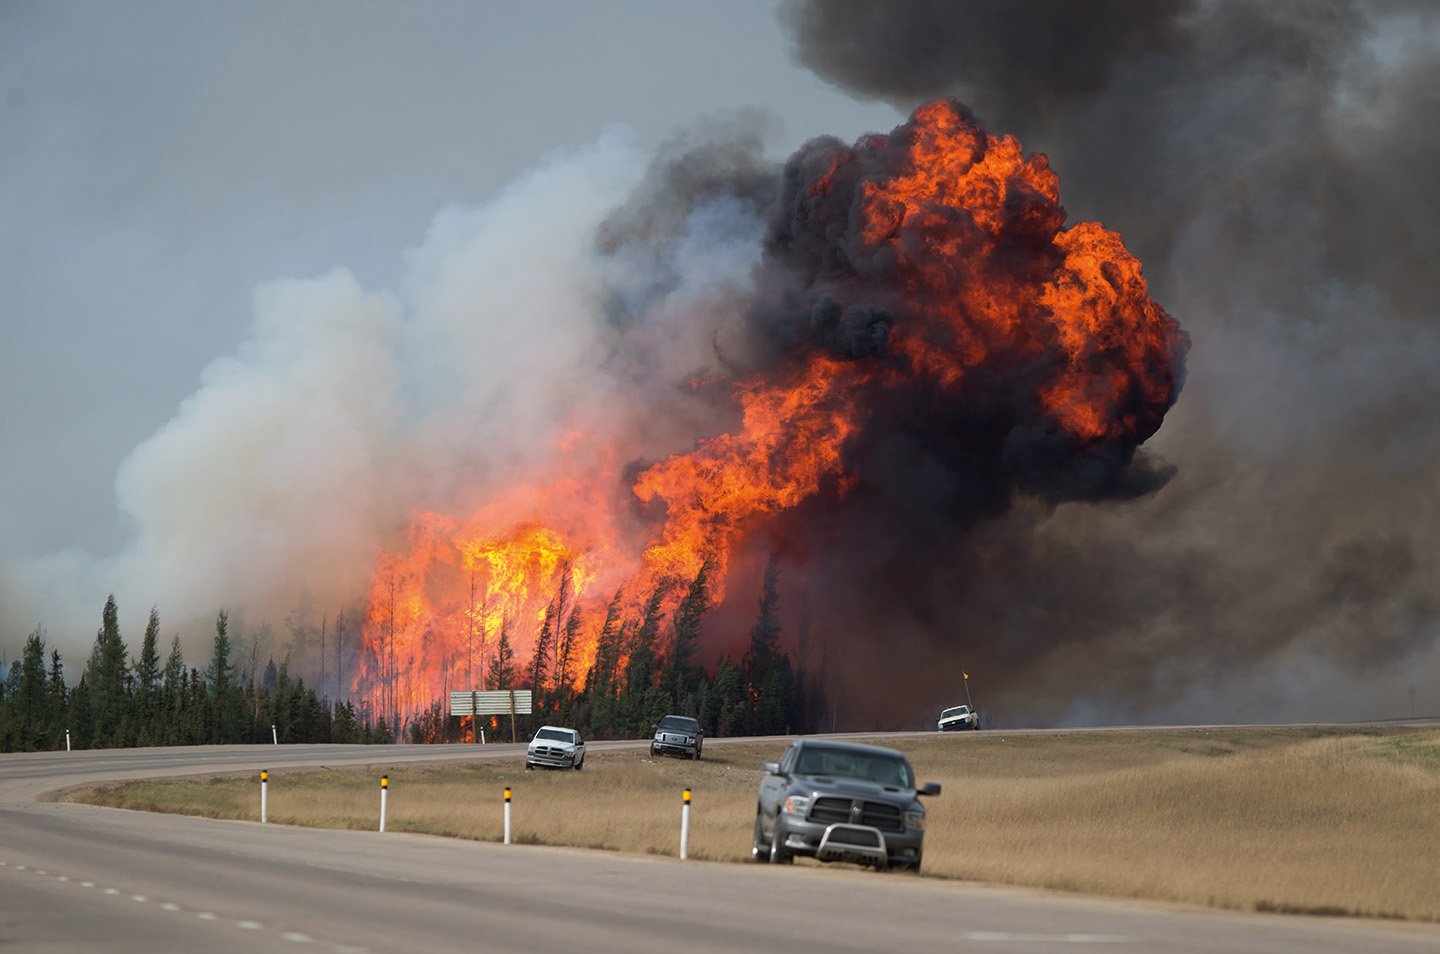 A wildfire burns behind abandoned vehicles on the Alberta Highway 63